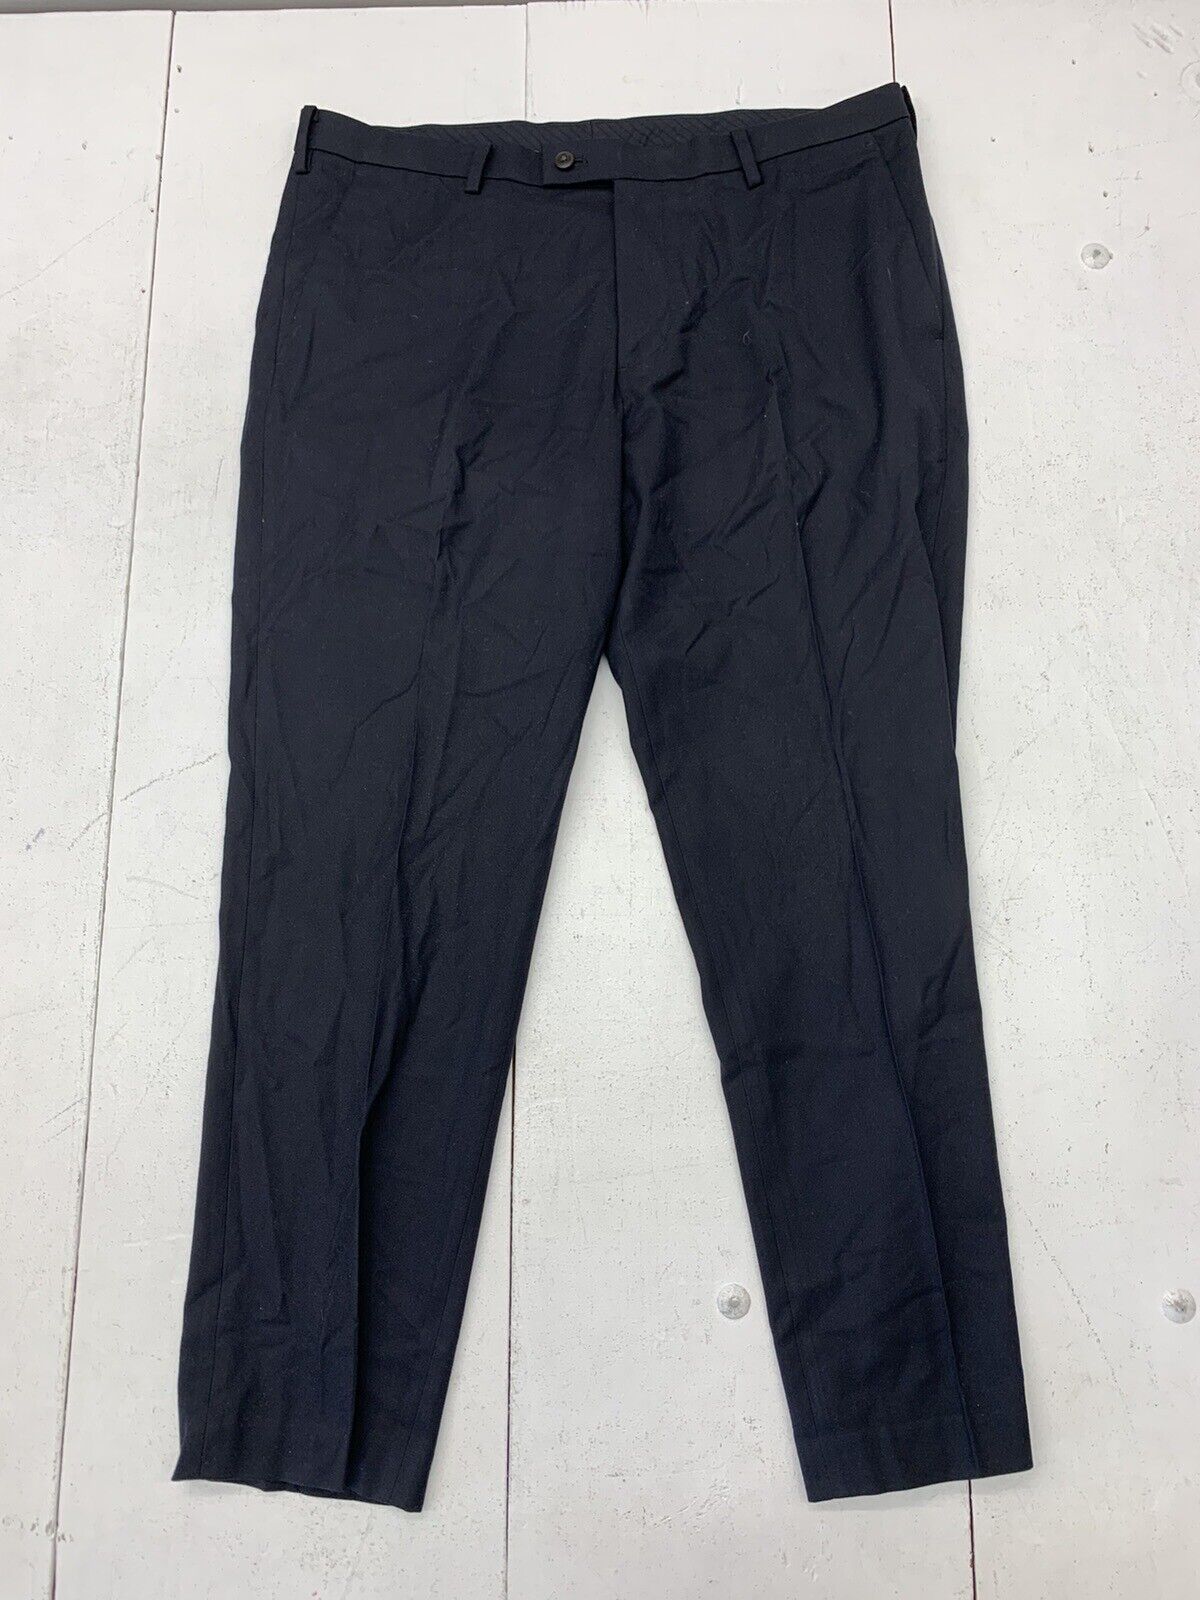 Uniqlo Trousers, Men's Fashion, Bottoms, Trousers on Carousell